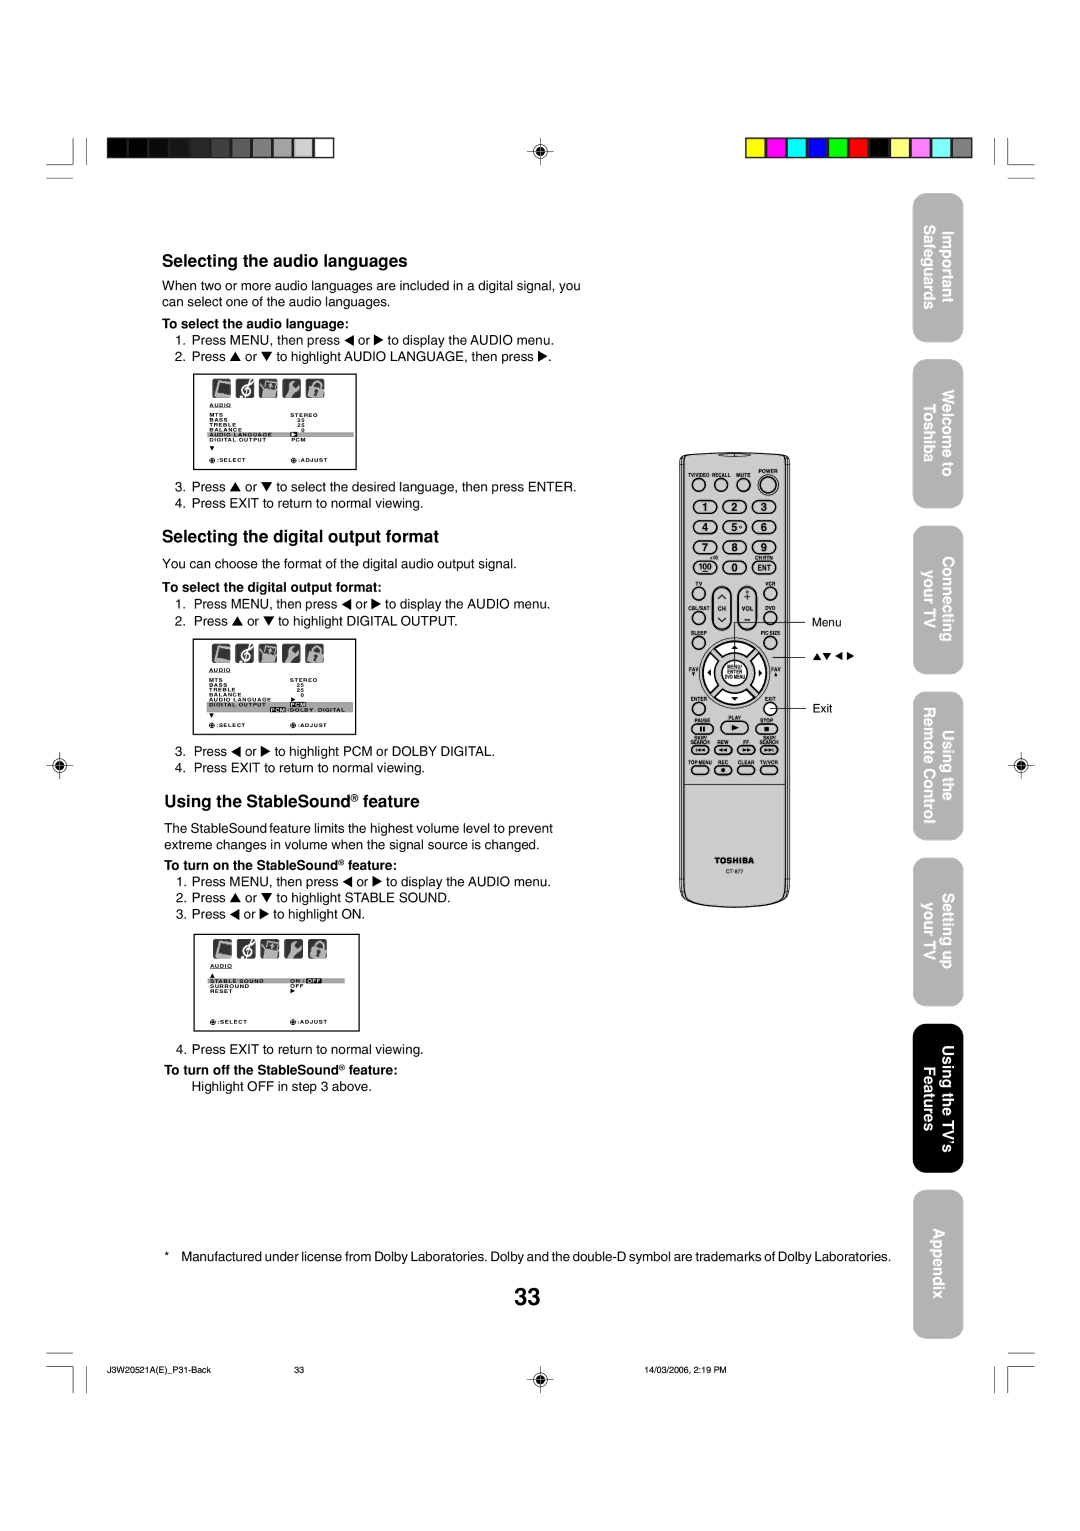 Toshiba 27DF46 appendix Selecting the audio languages, Selecting the digital output format, Using the StableSound feature 